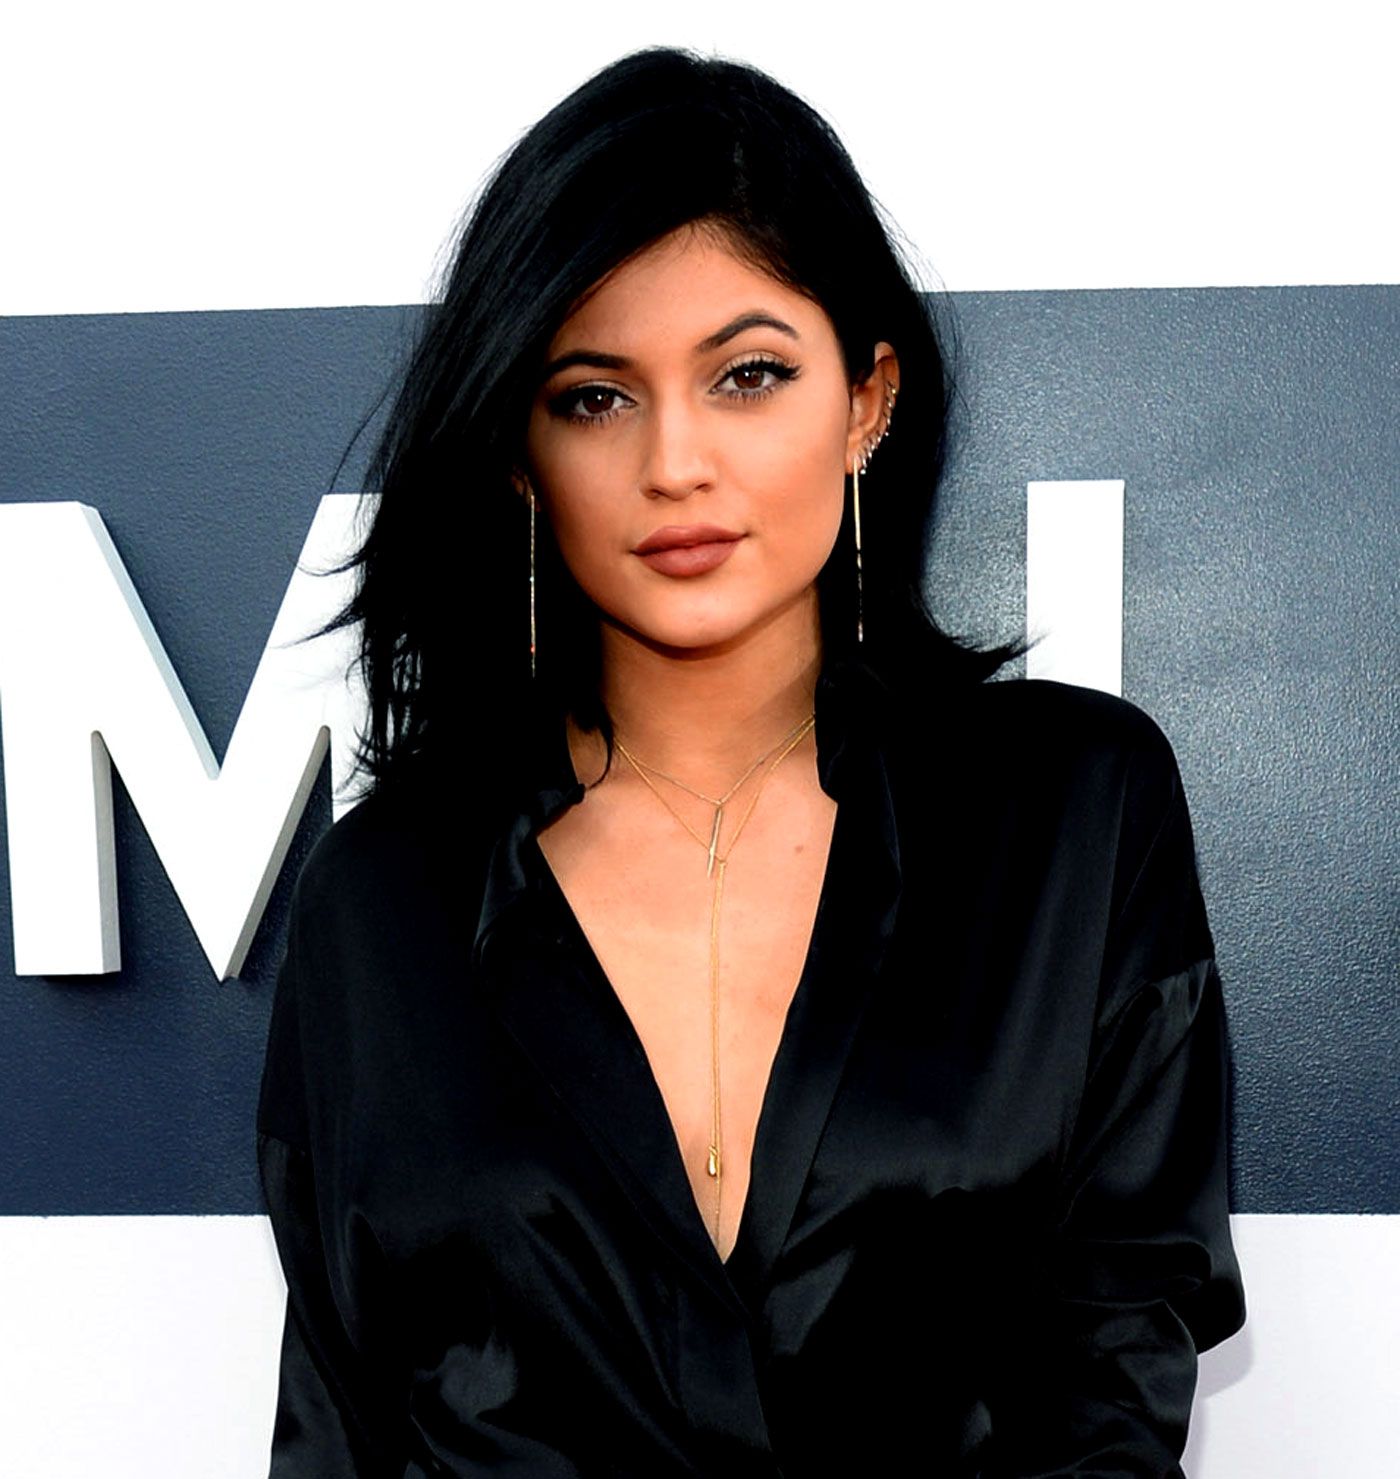  Kylie Jenner rubbishes rumours of her pregnancy